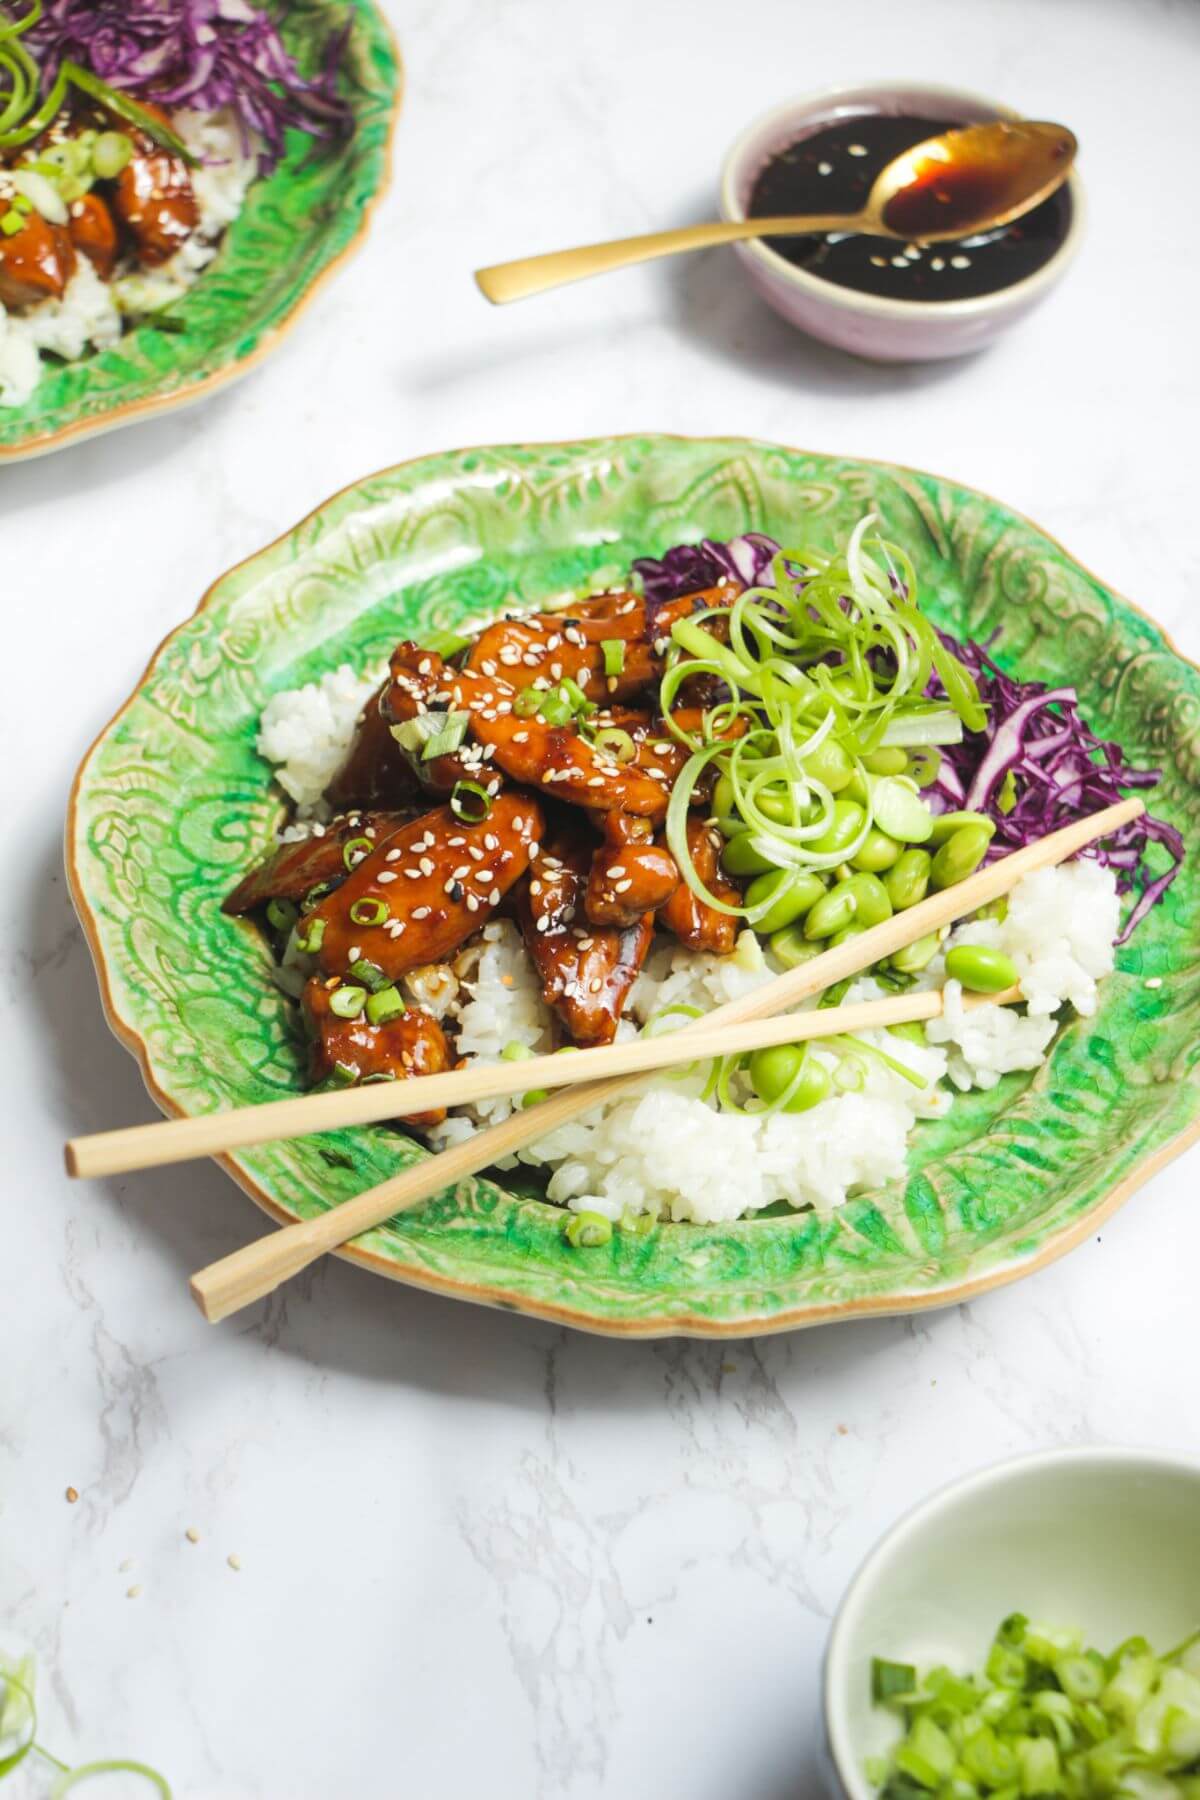 Glossy teriyaki chicken pieces on rice, with red cabbage and scallions on a green plate.